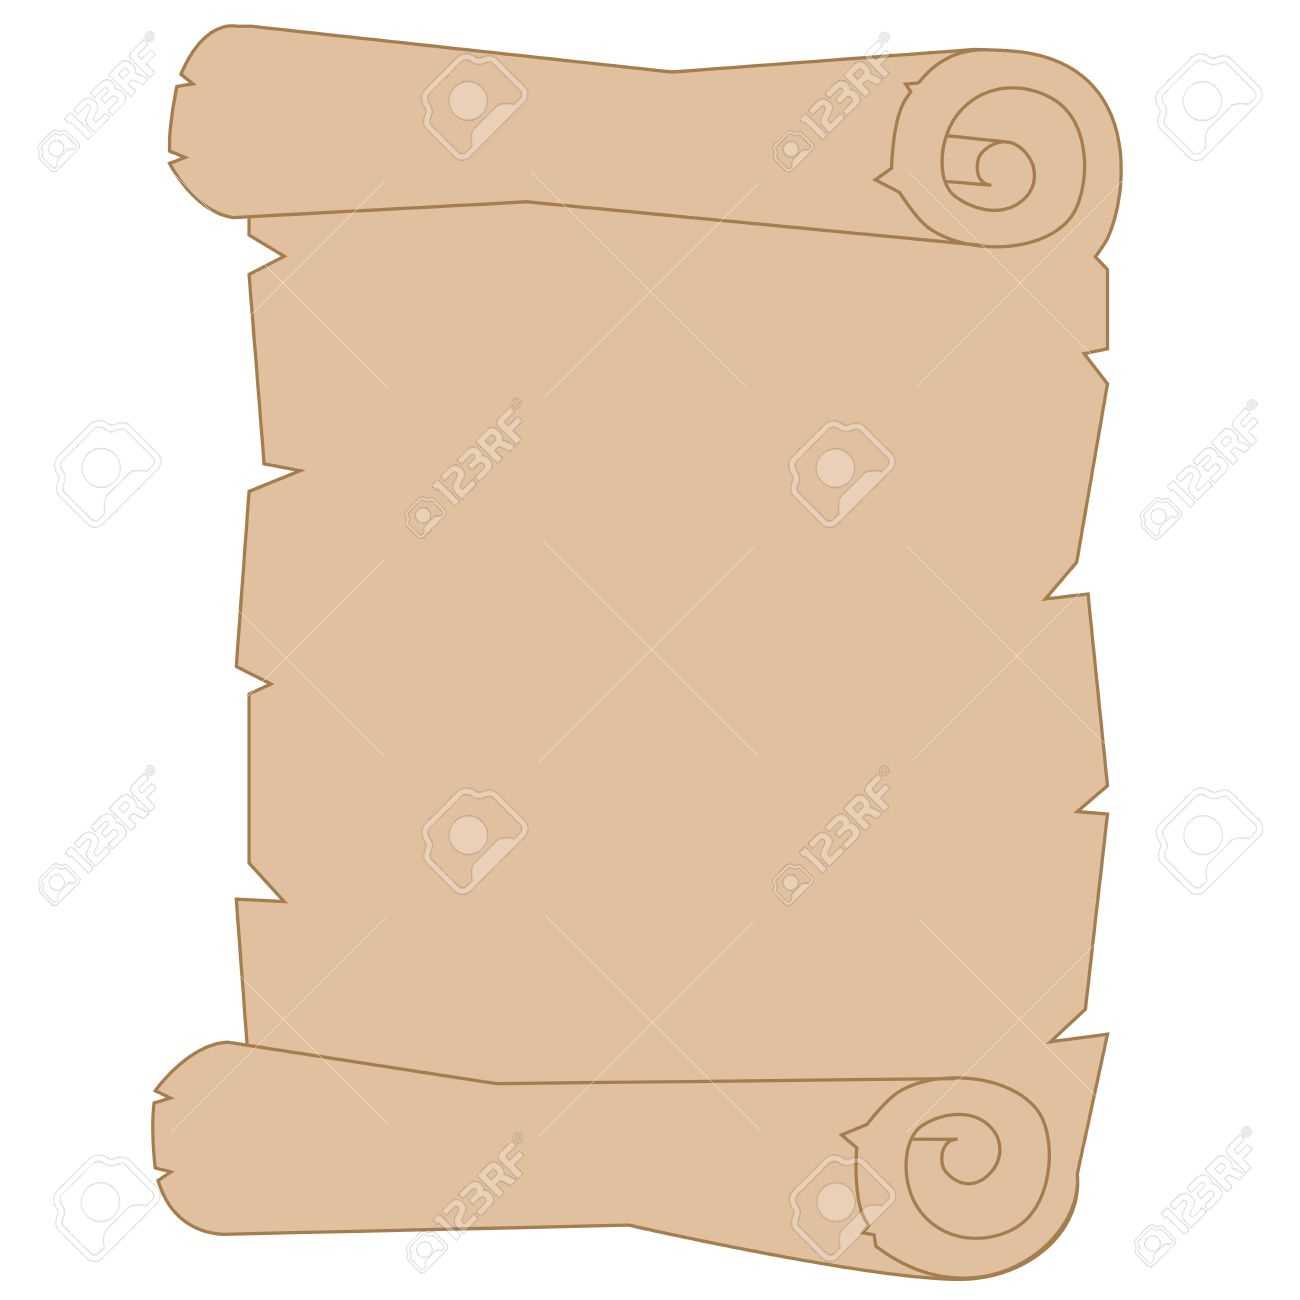 Blank Treasure Map With Regard To Blank Pirate Map Template